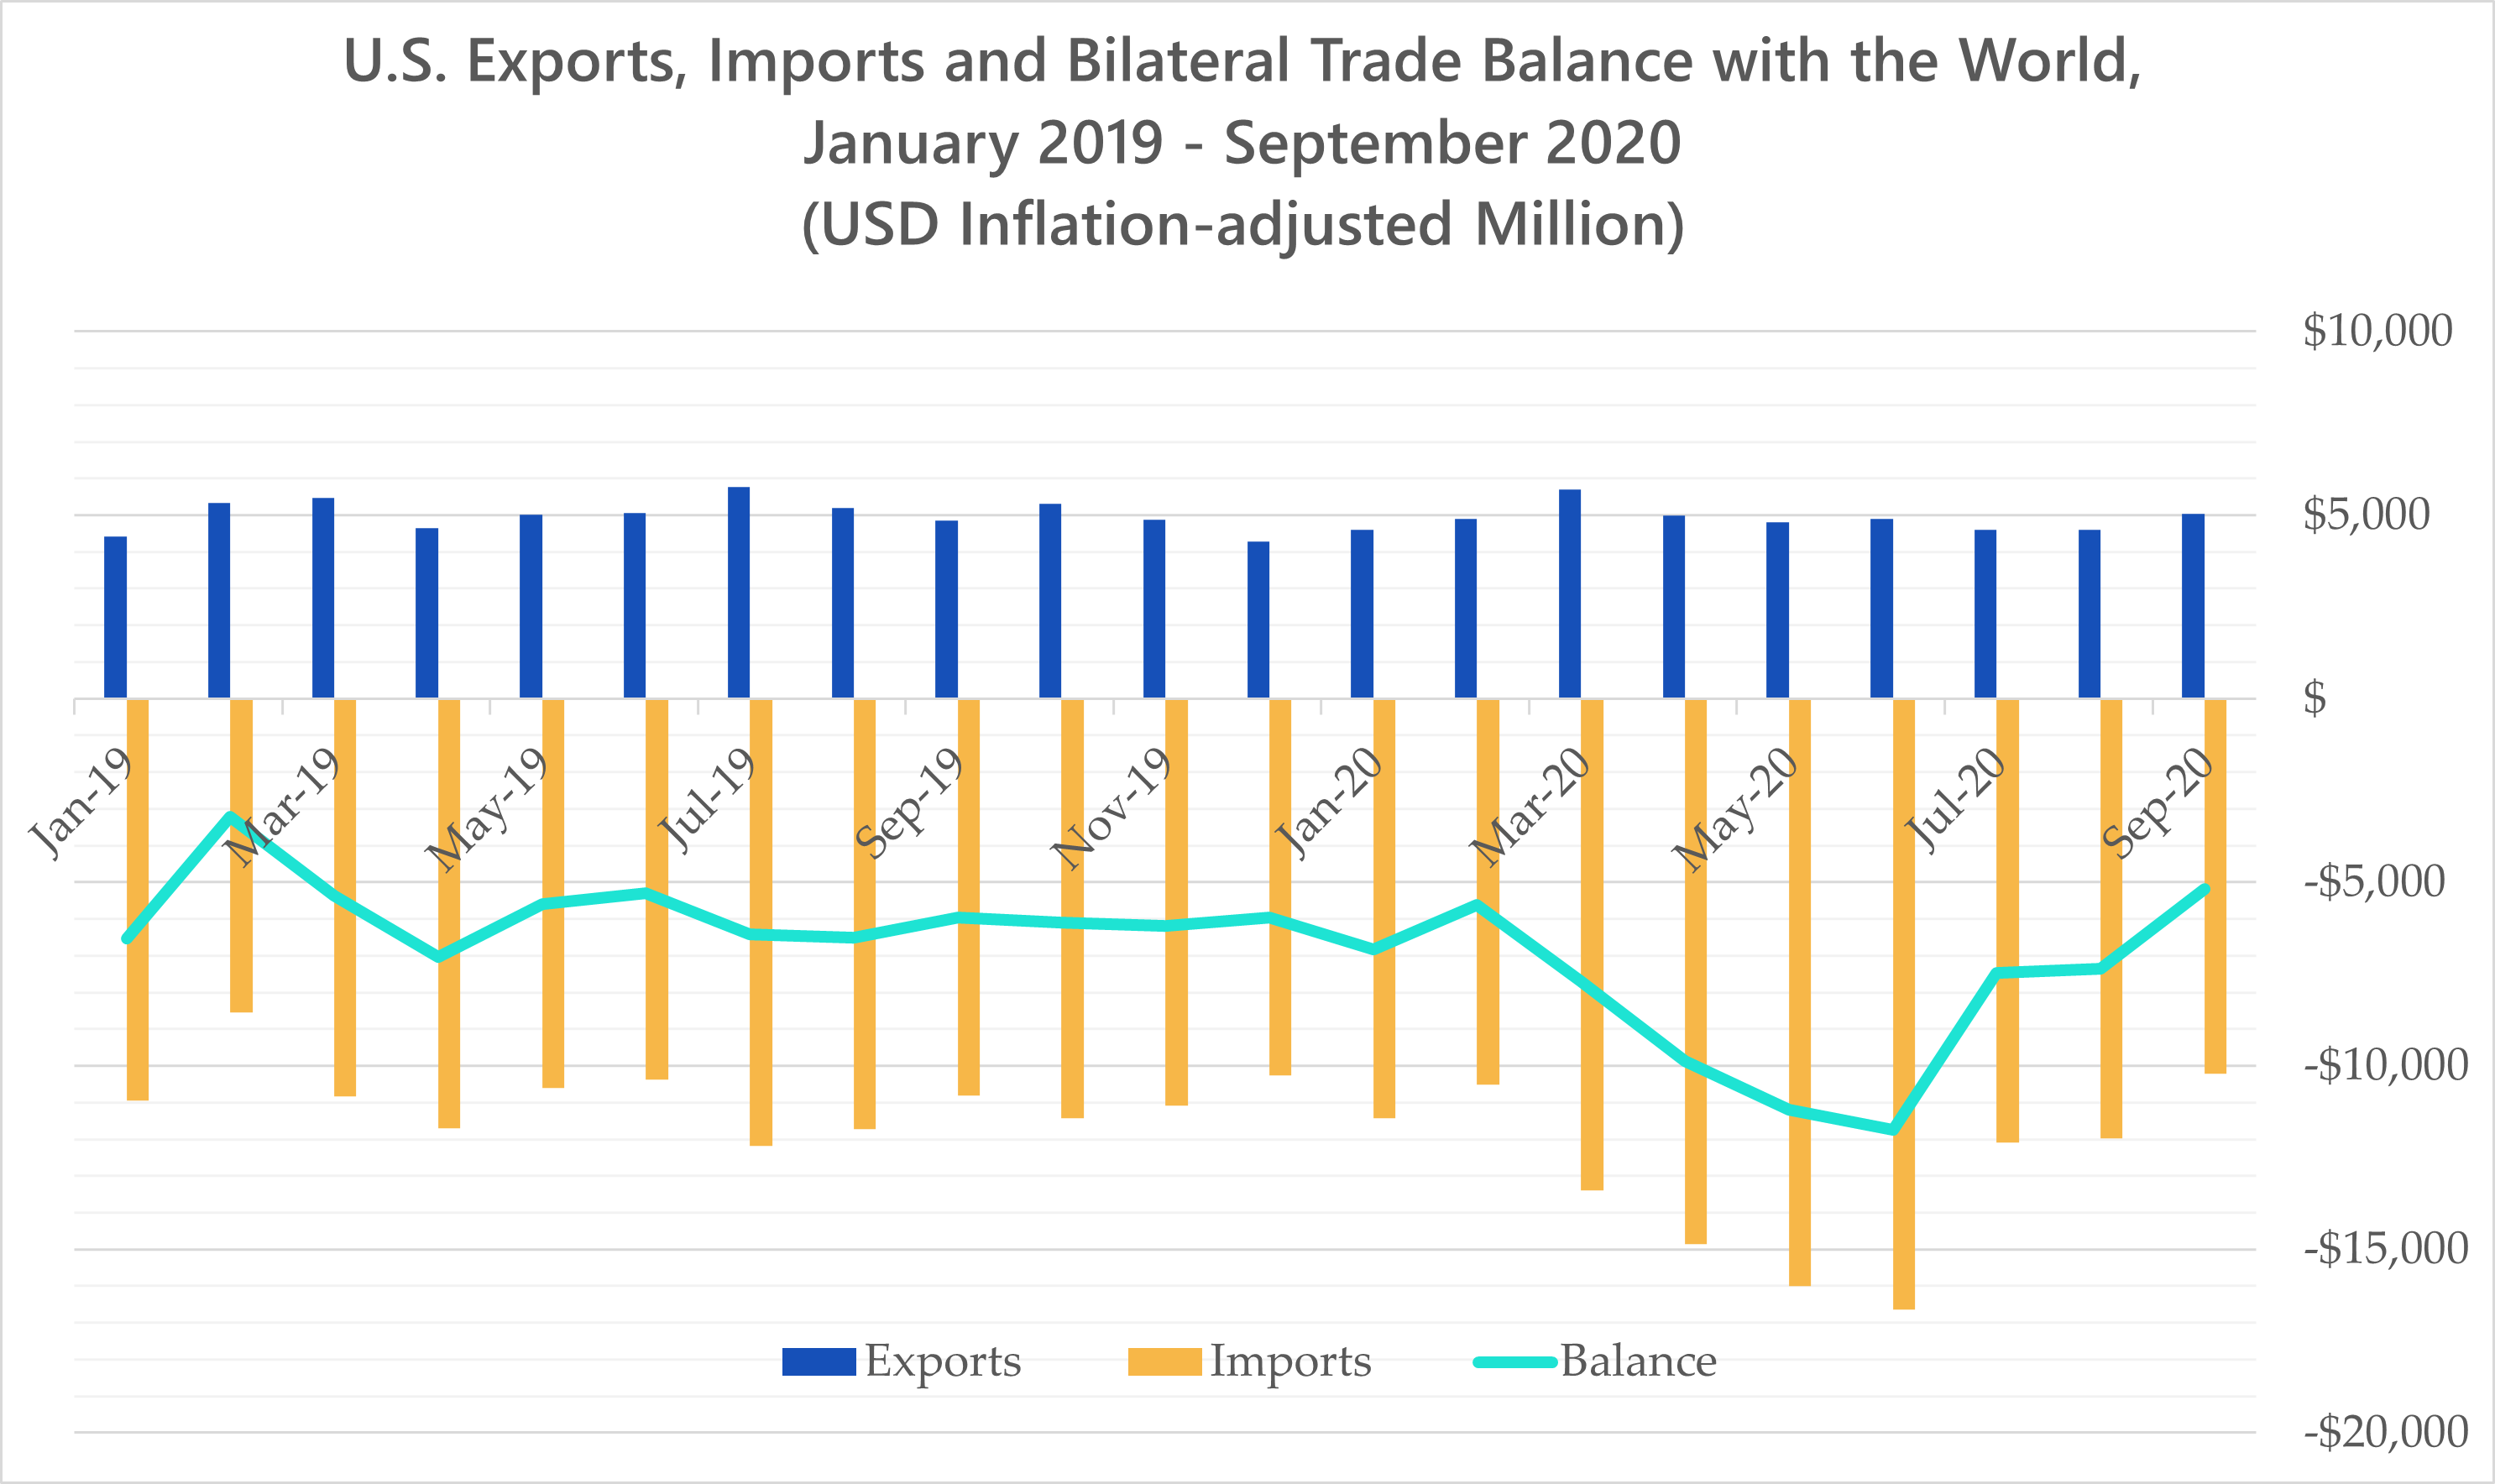 U.S. Exports, Imports and Bilateral Trade Balance with the World